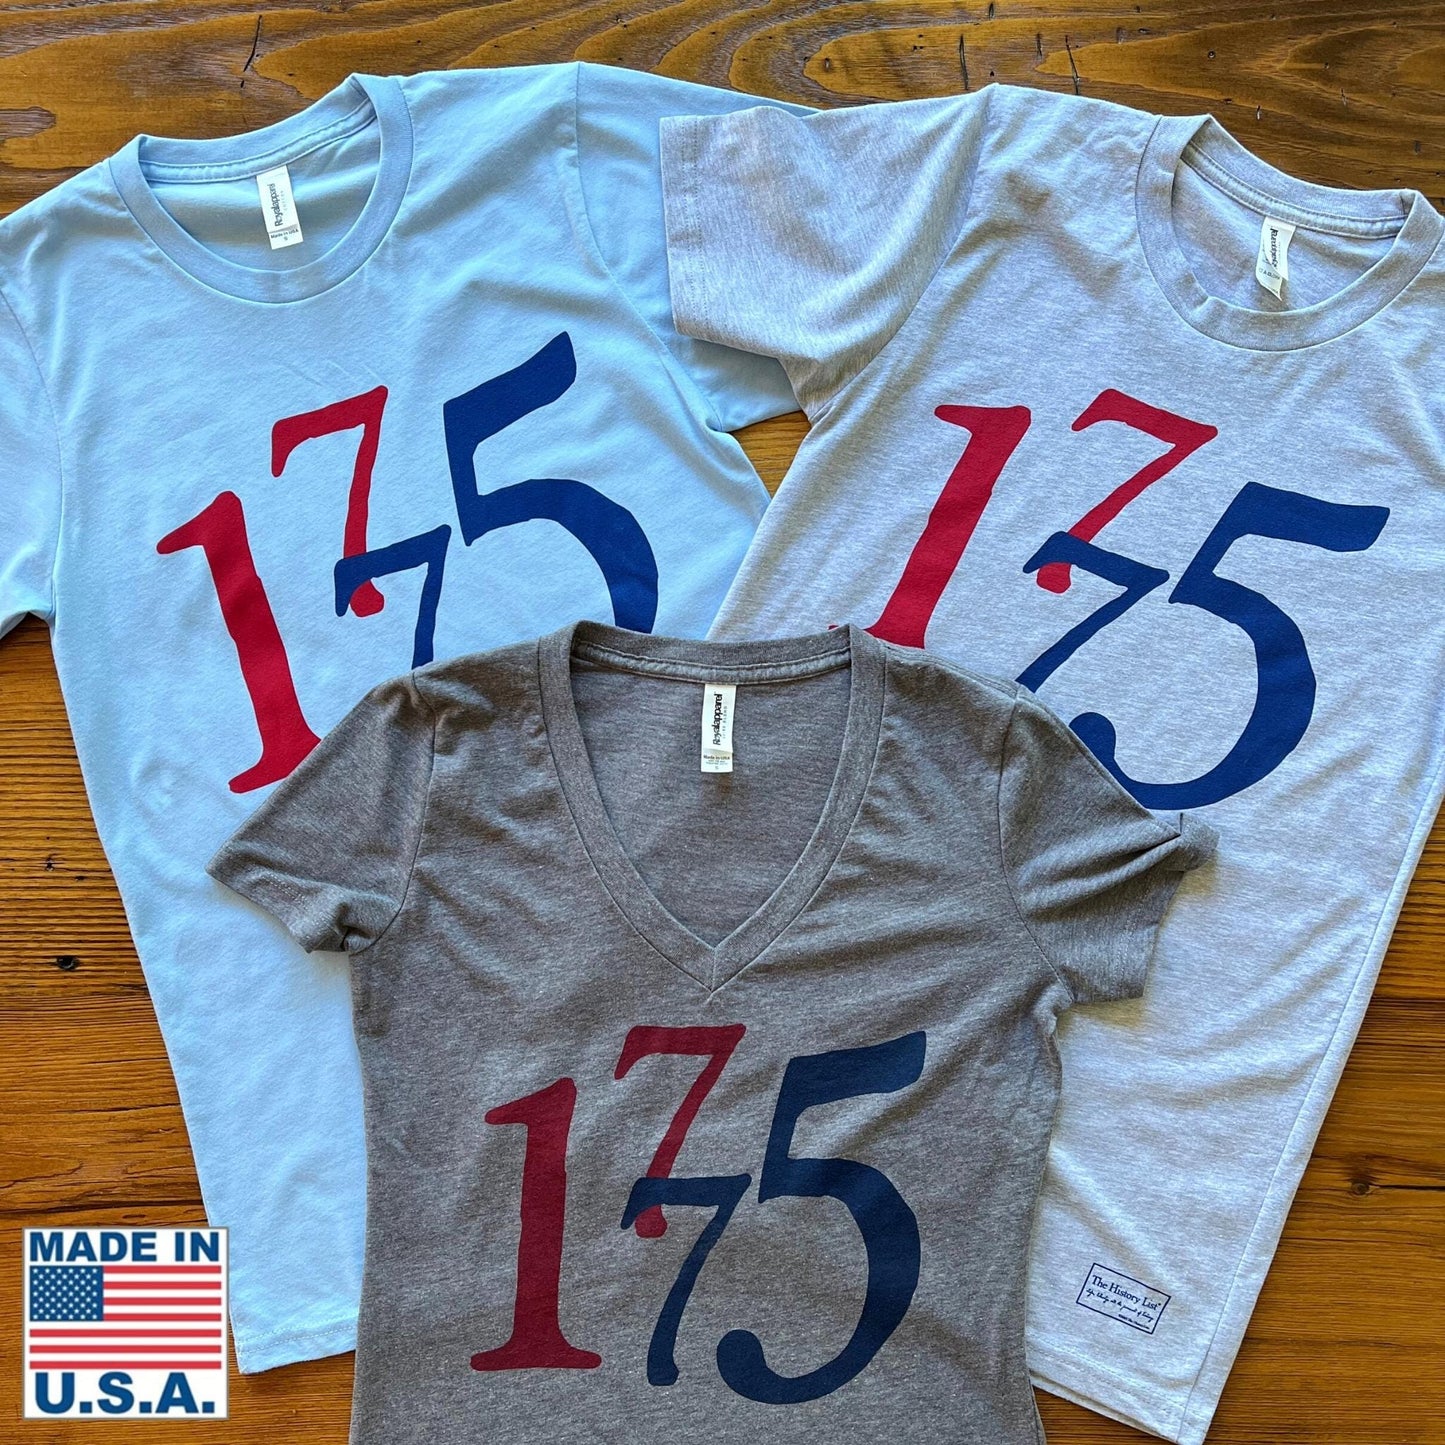 Lexington and Concord "1775" — Made in the USA Shirts from The History List store